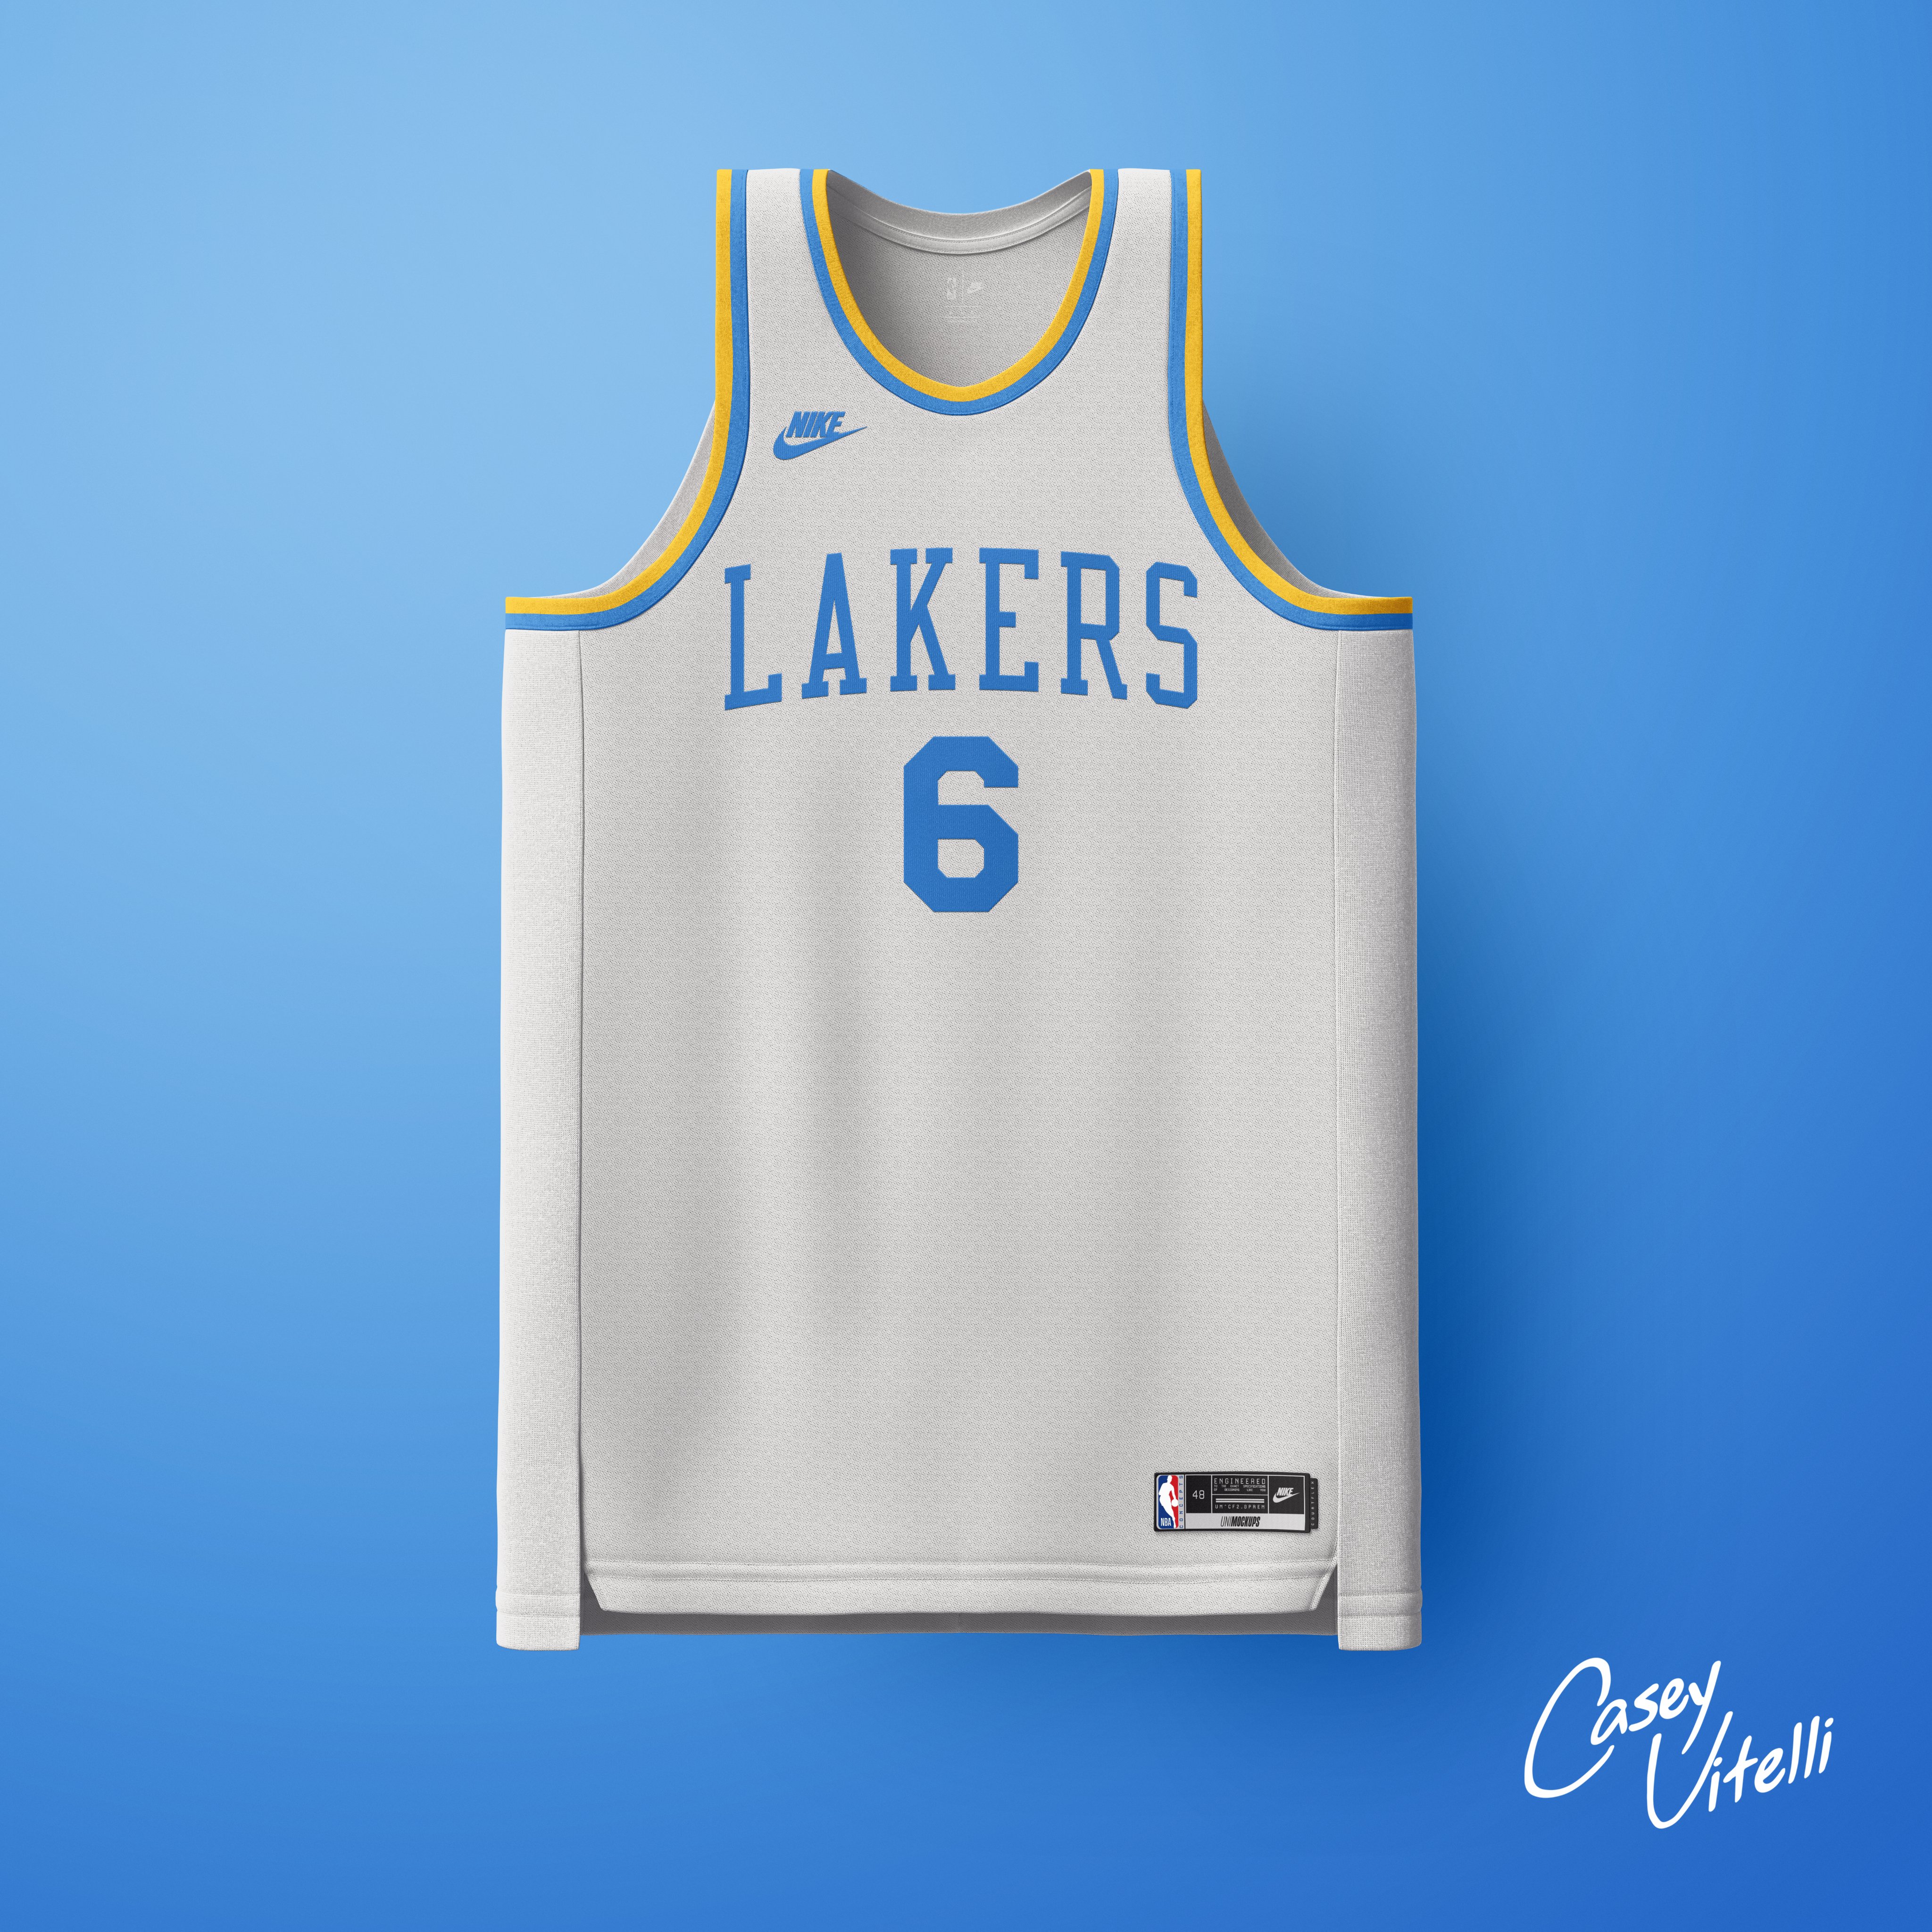 LA Lakers Jersey Concept I made (ig: @lucsdesign91), doing a new